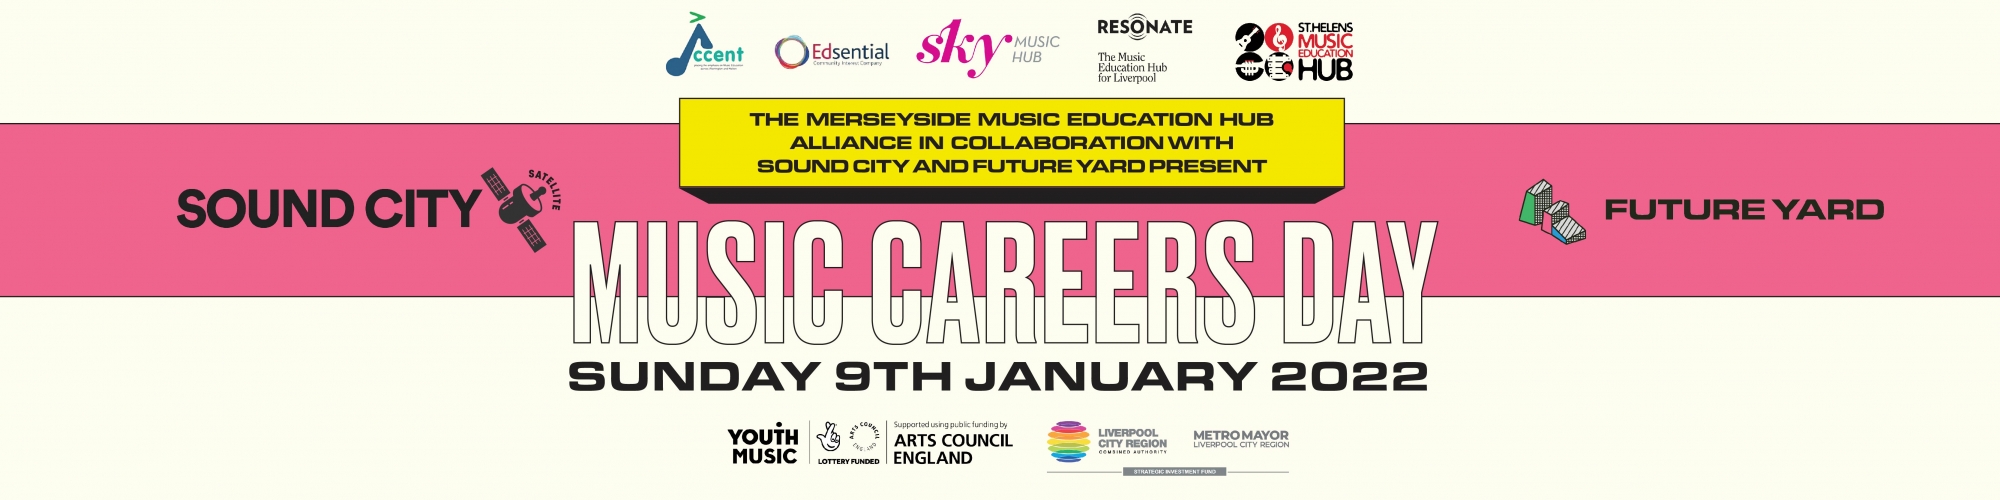 Sound City Satellite Presents: Music Careers Day at Future Yard